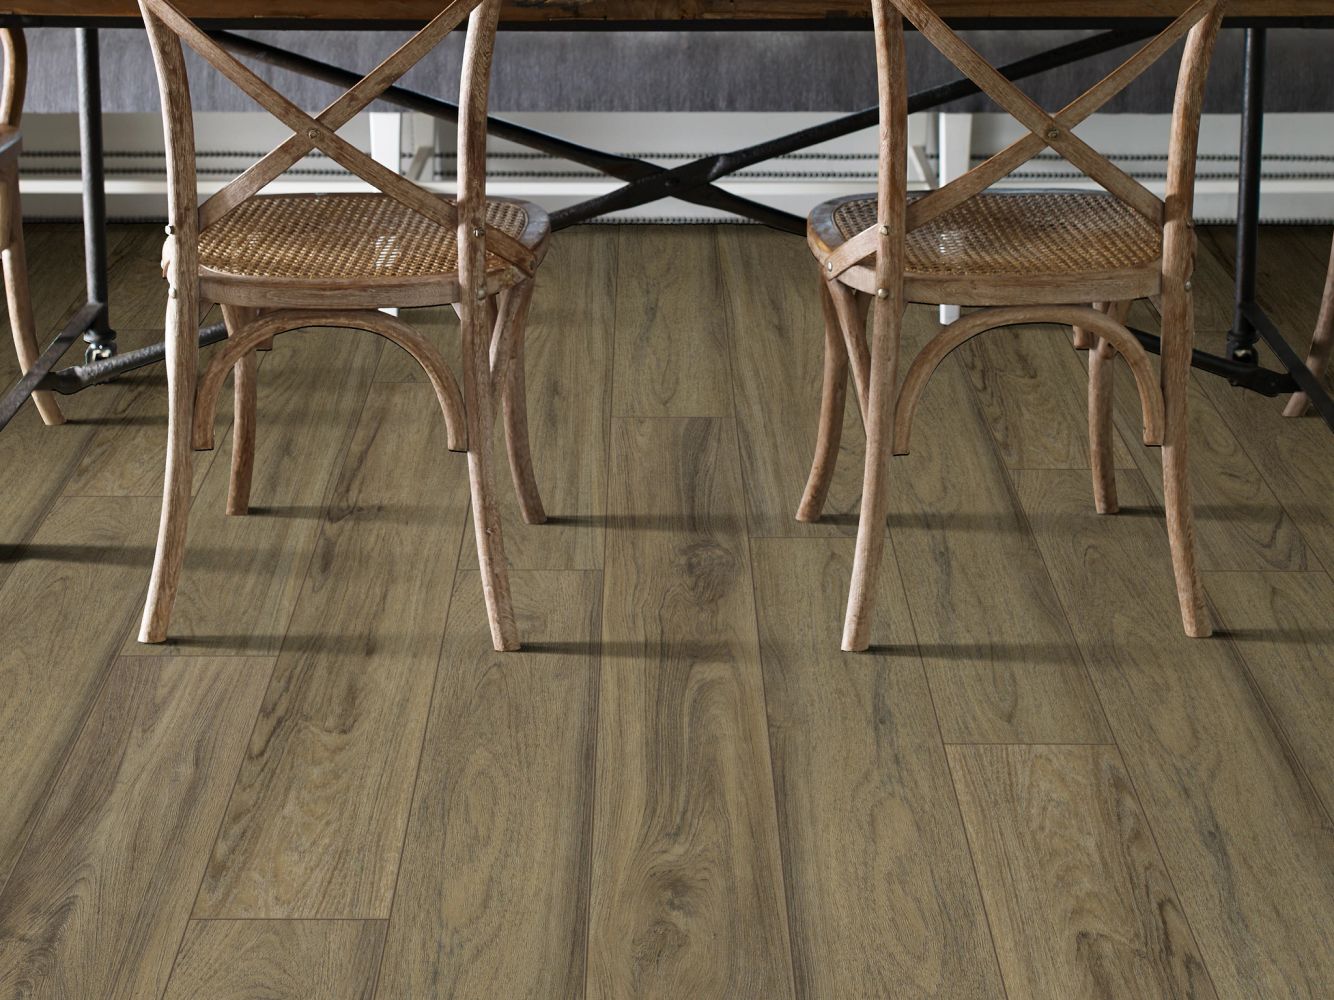 Shaw Floors Resilient Residential Pantheon HD Plus Fiano 00587_2001V